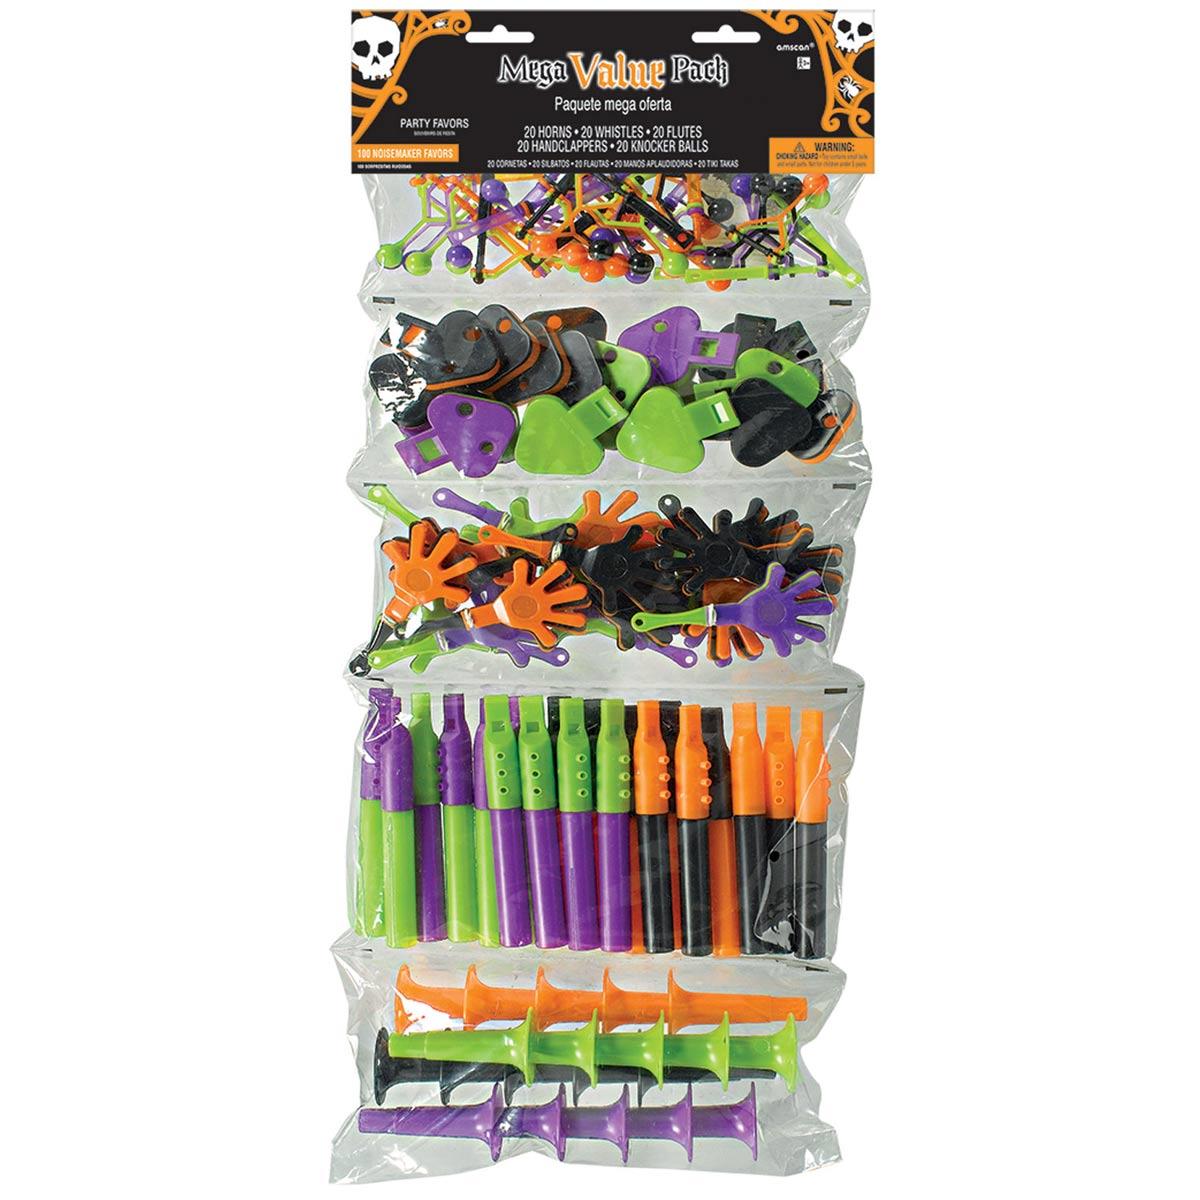 Mega Mix Halloween Favours - 100pcs whistles, hand clappers, horns, flutes and mini-clappers by Amscan 398724 available here at Karnival Costumes online Halloween party shop